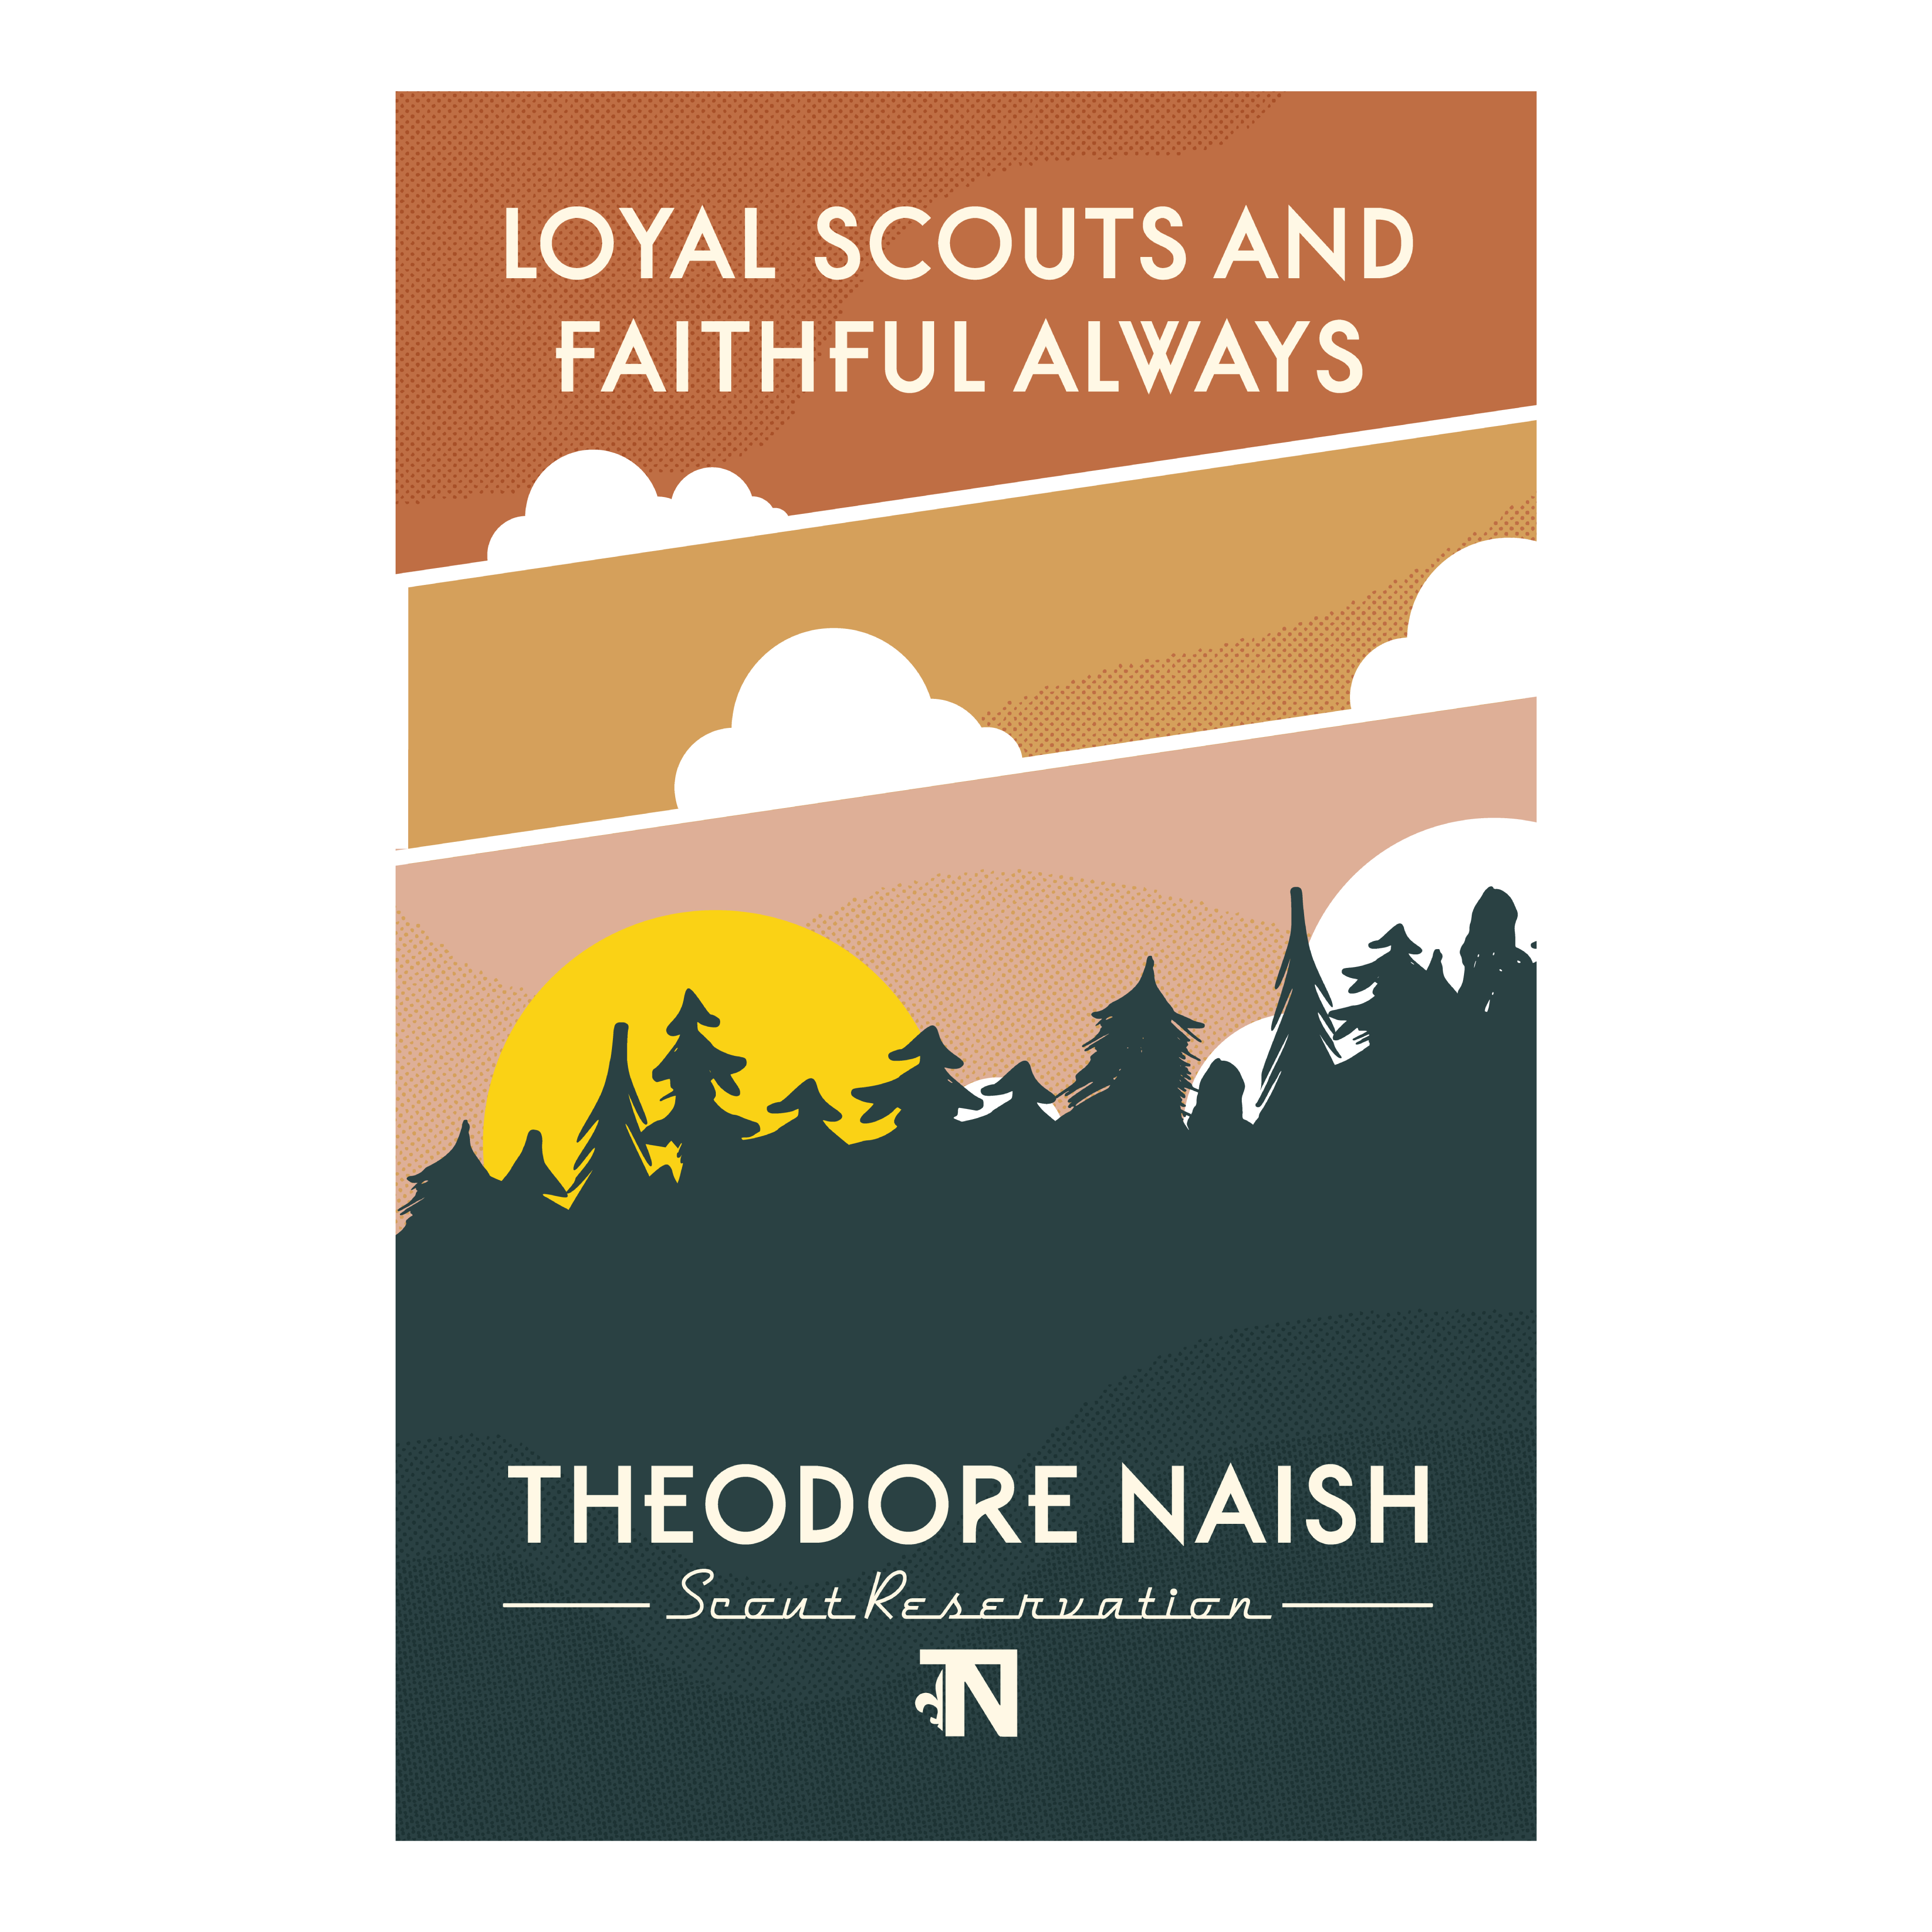 Boy Scouts of America | Theodore Naish Scout Reservation Poster